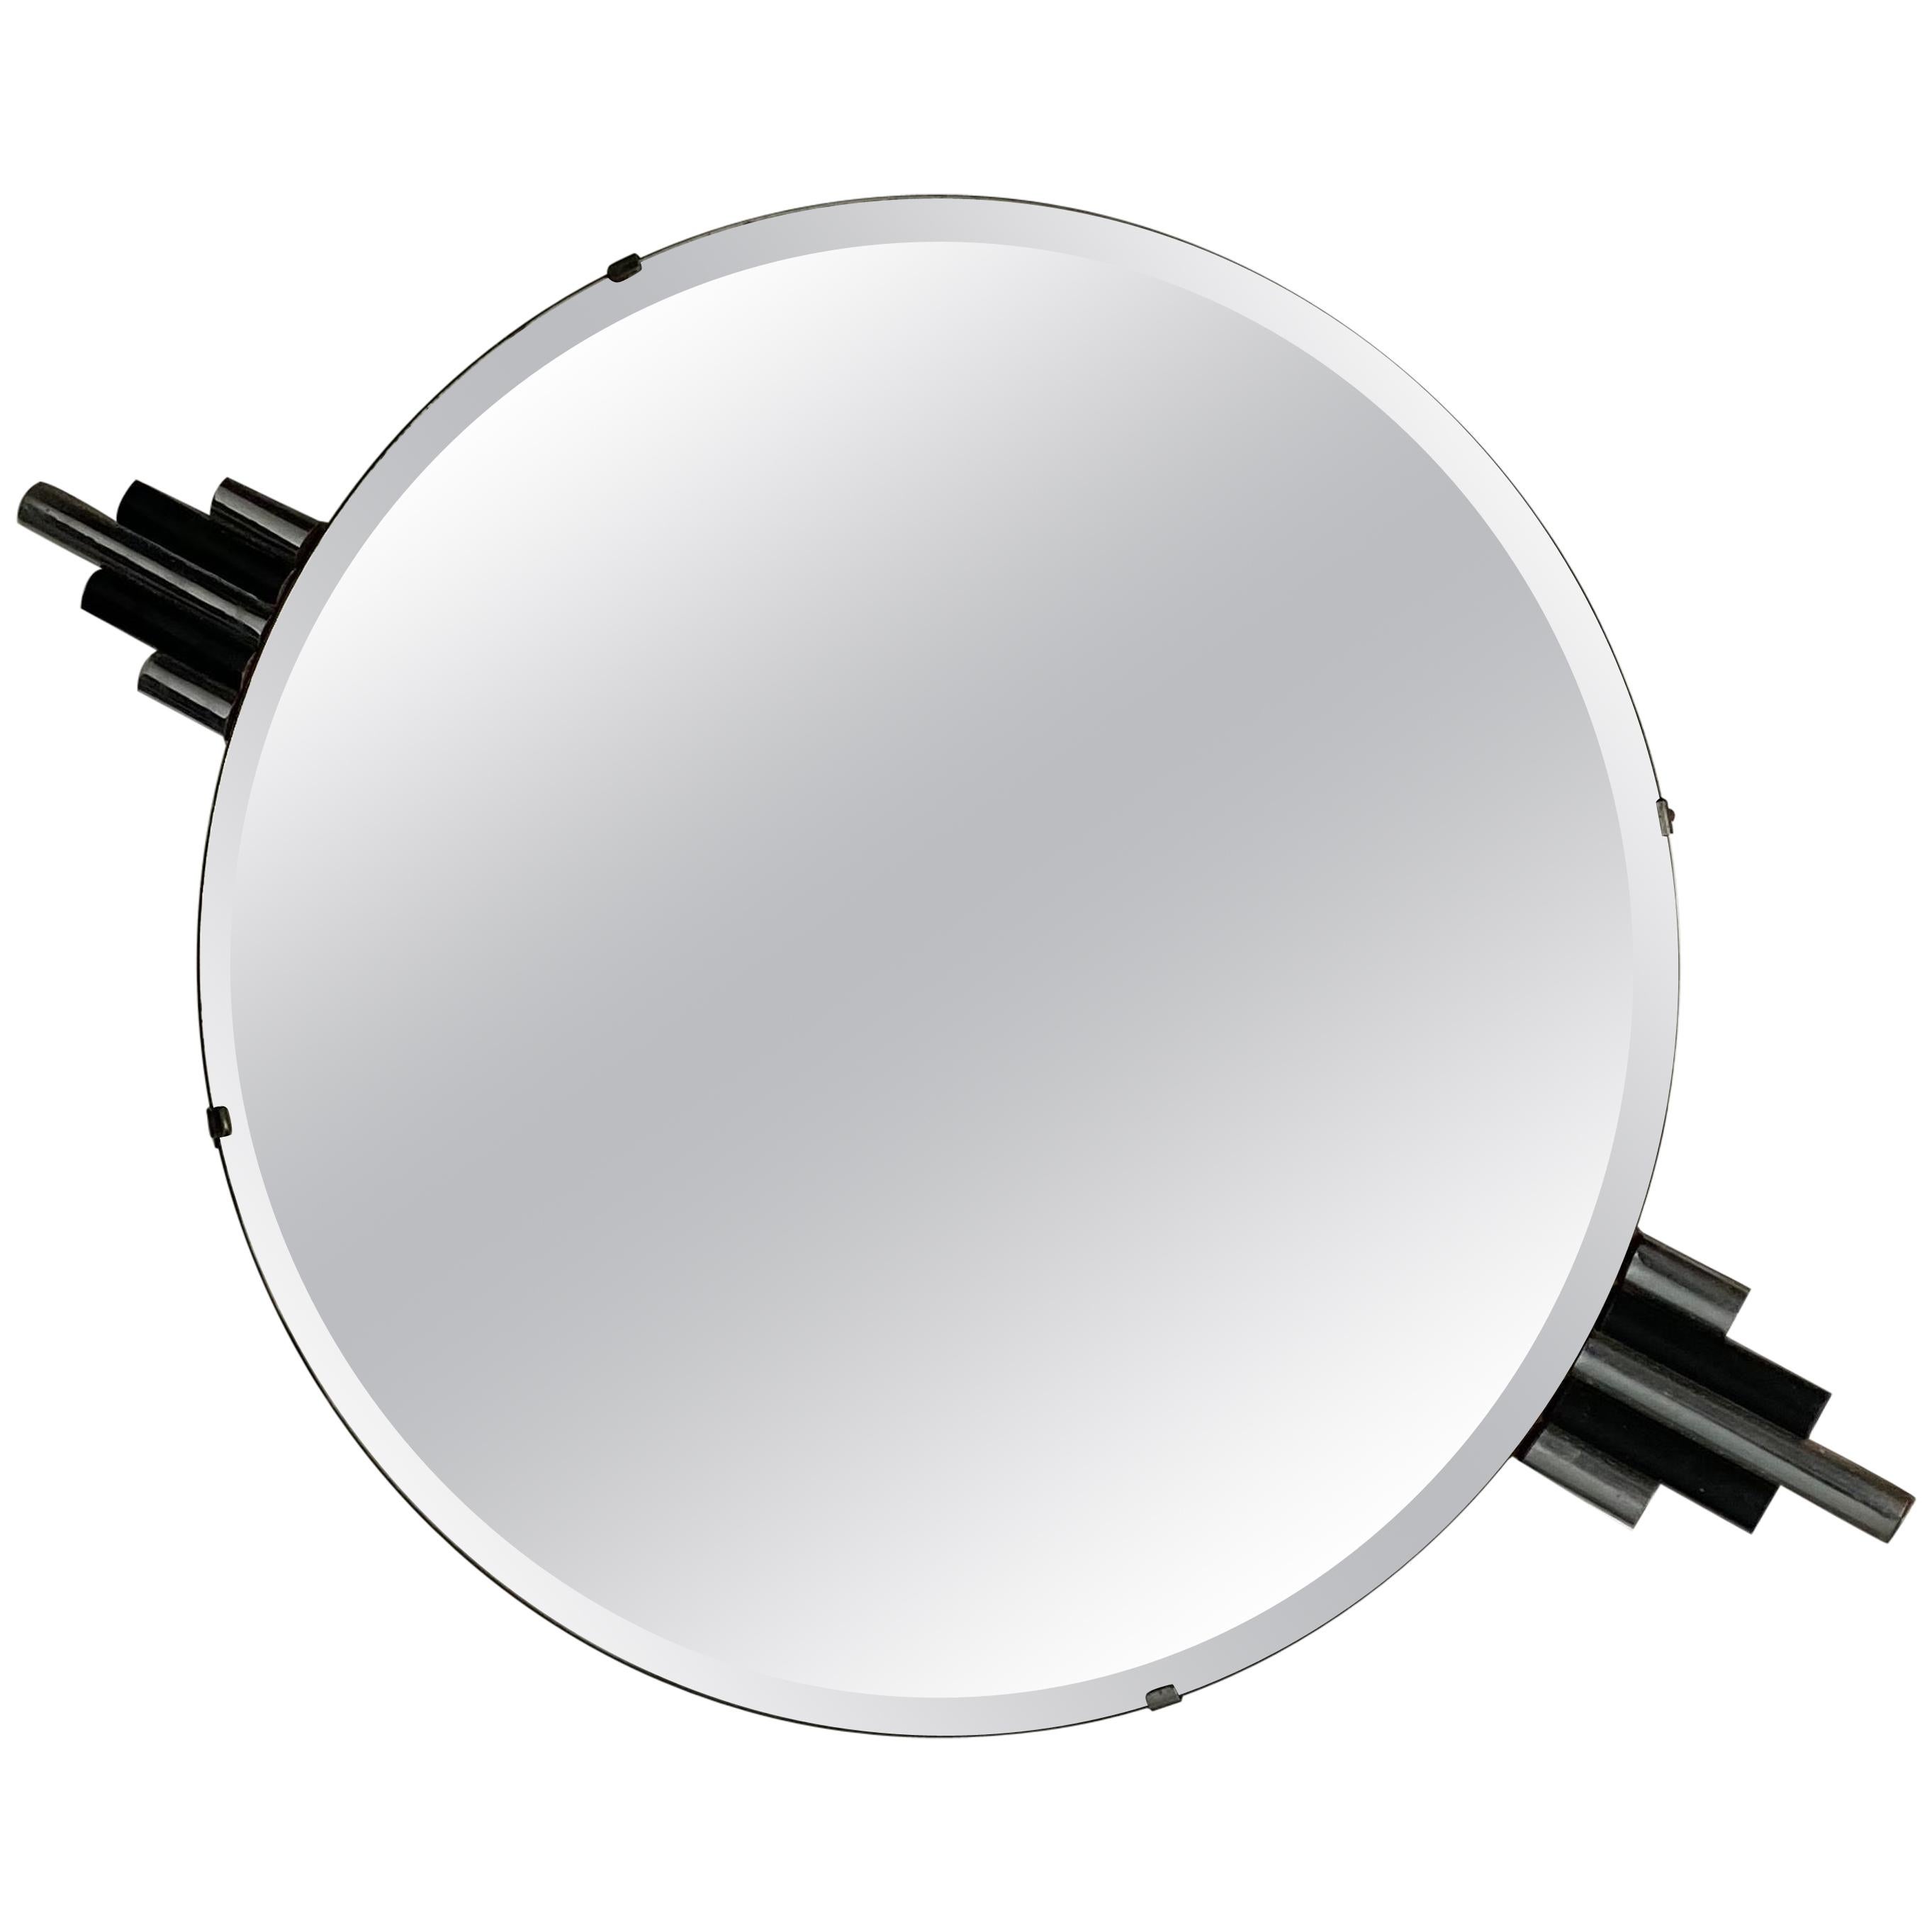 Unusual Art Deco Wall Mirror with Black and Chrome Sky-Scraper Sides